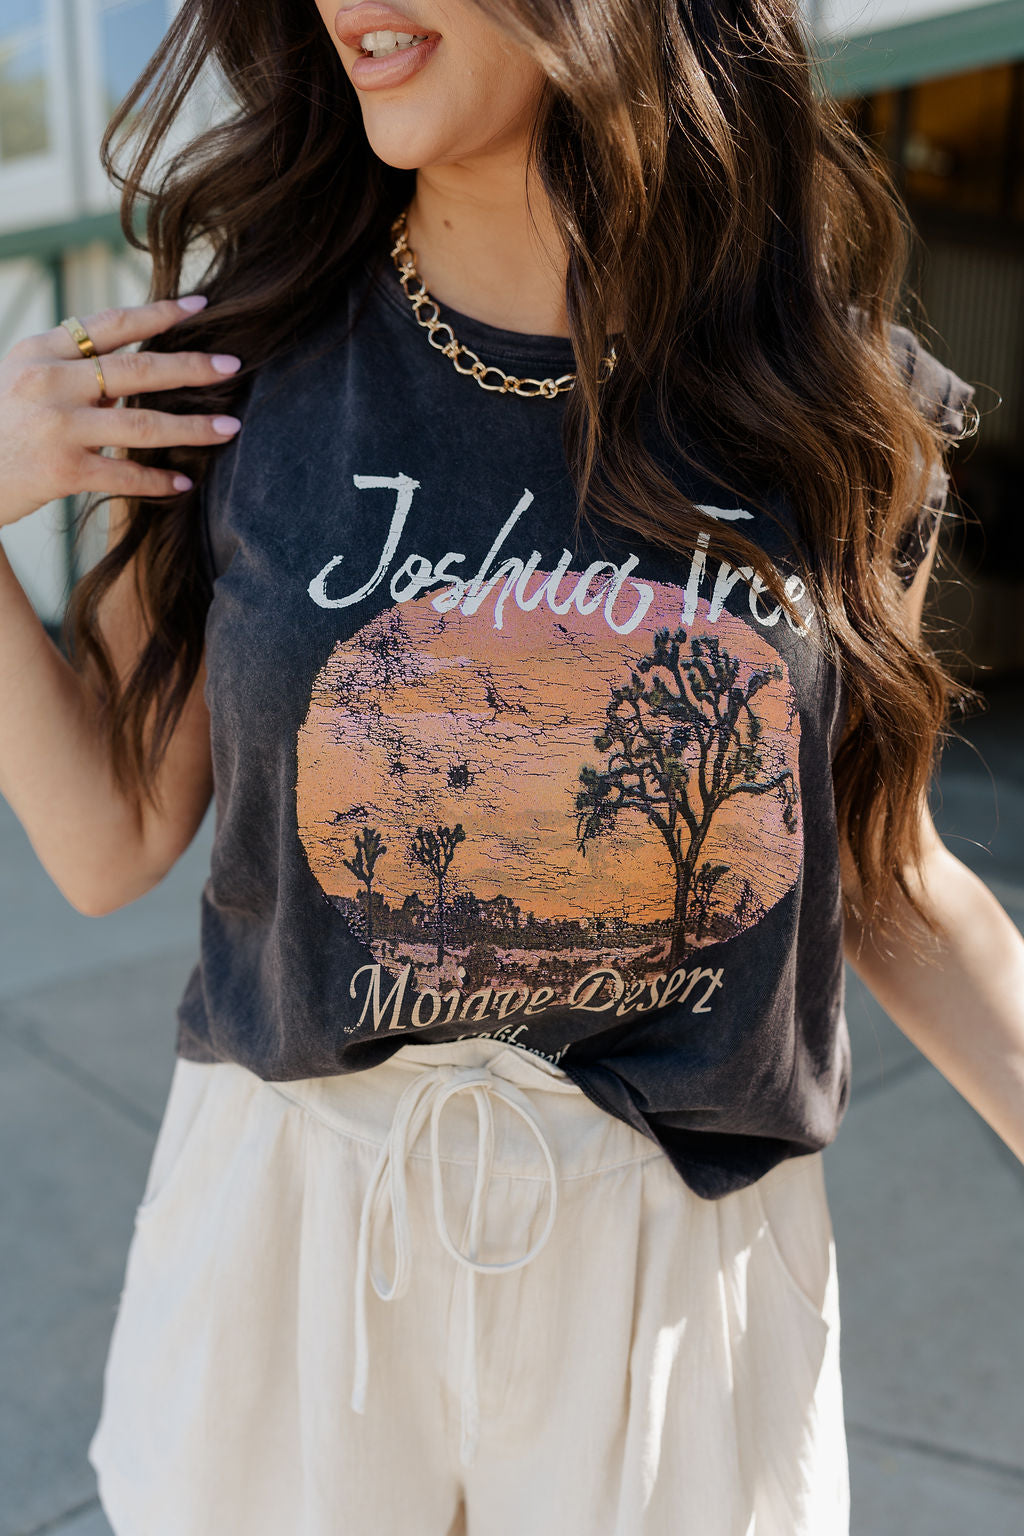 Close front upper body view of female model wearing the Joshua Tree Charcoal Grey Graphic Tee that has distressed charcoal grey fabric, a round neck, and is sleeveless. Features a circular sunset desert graphic with text that says "Joshua Tree Mojave Desert California"